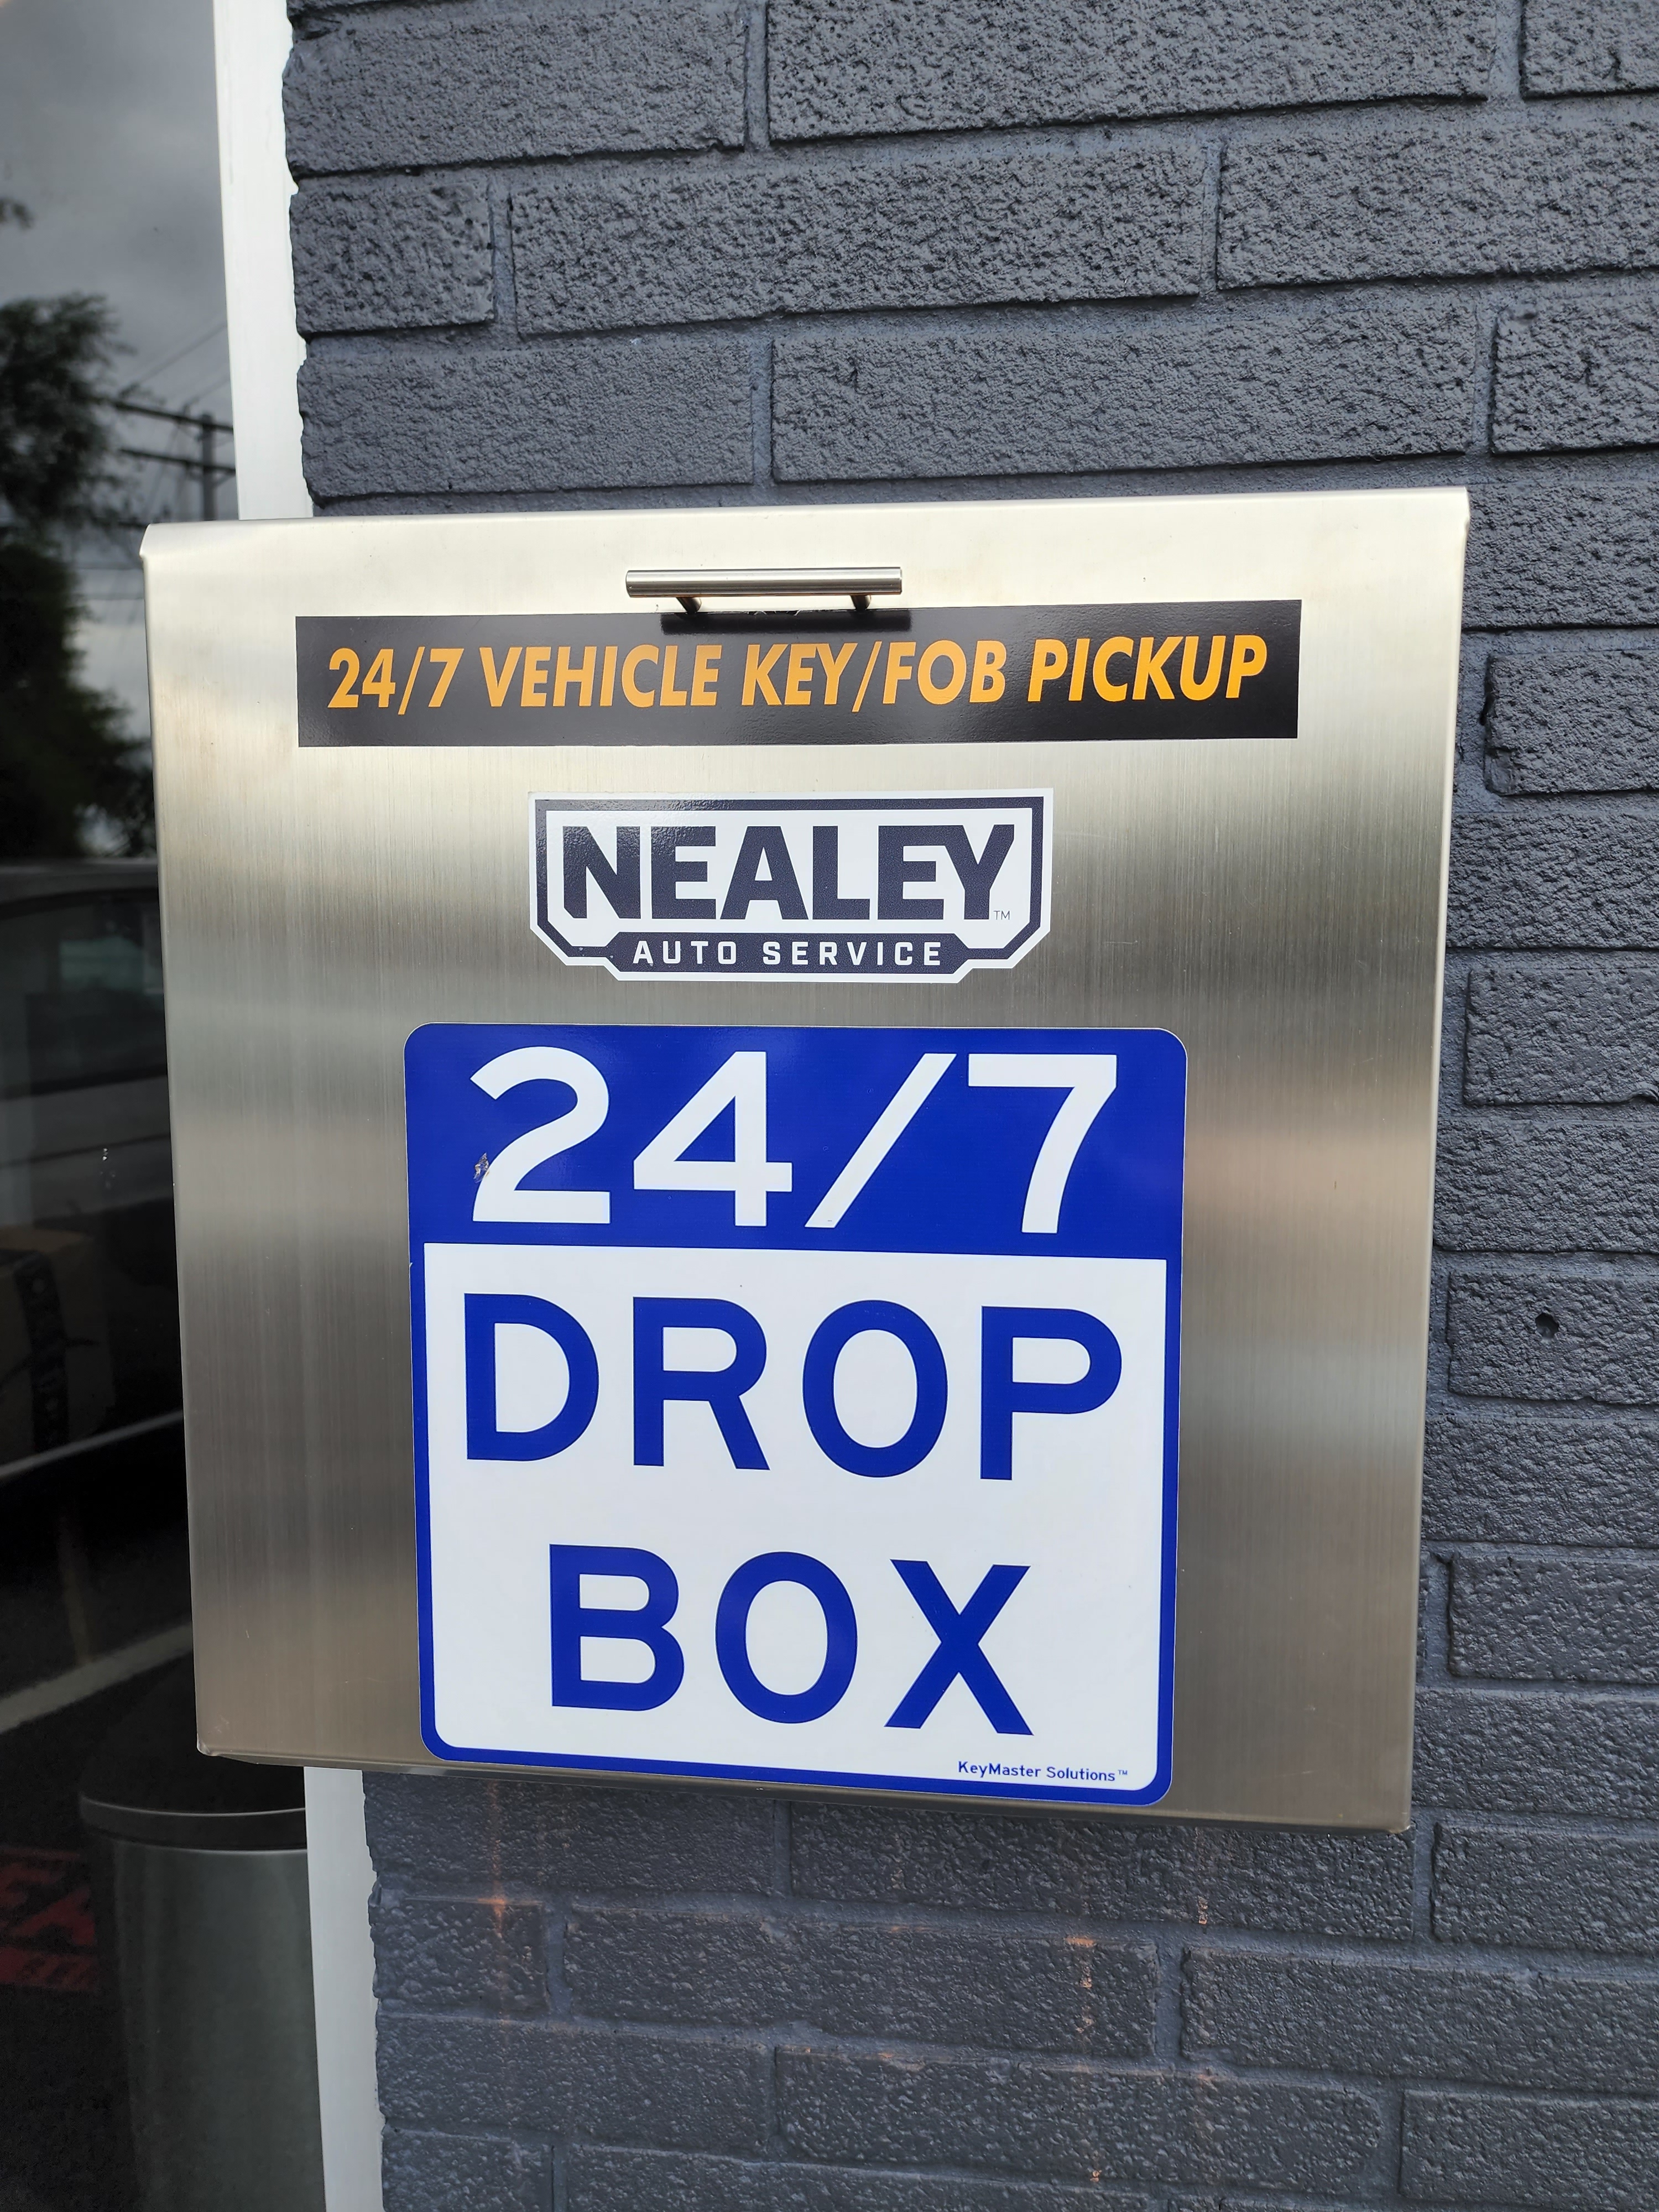 Nealey Tire & Auto - Our Drop Box